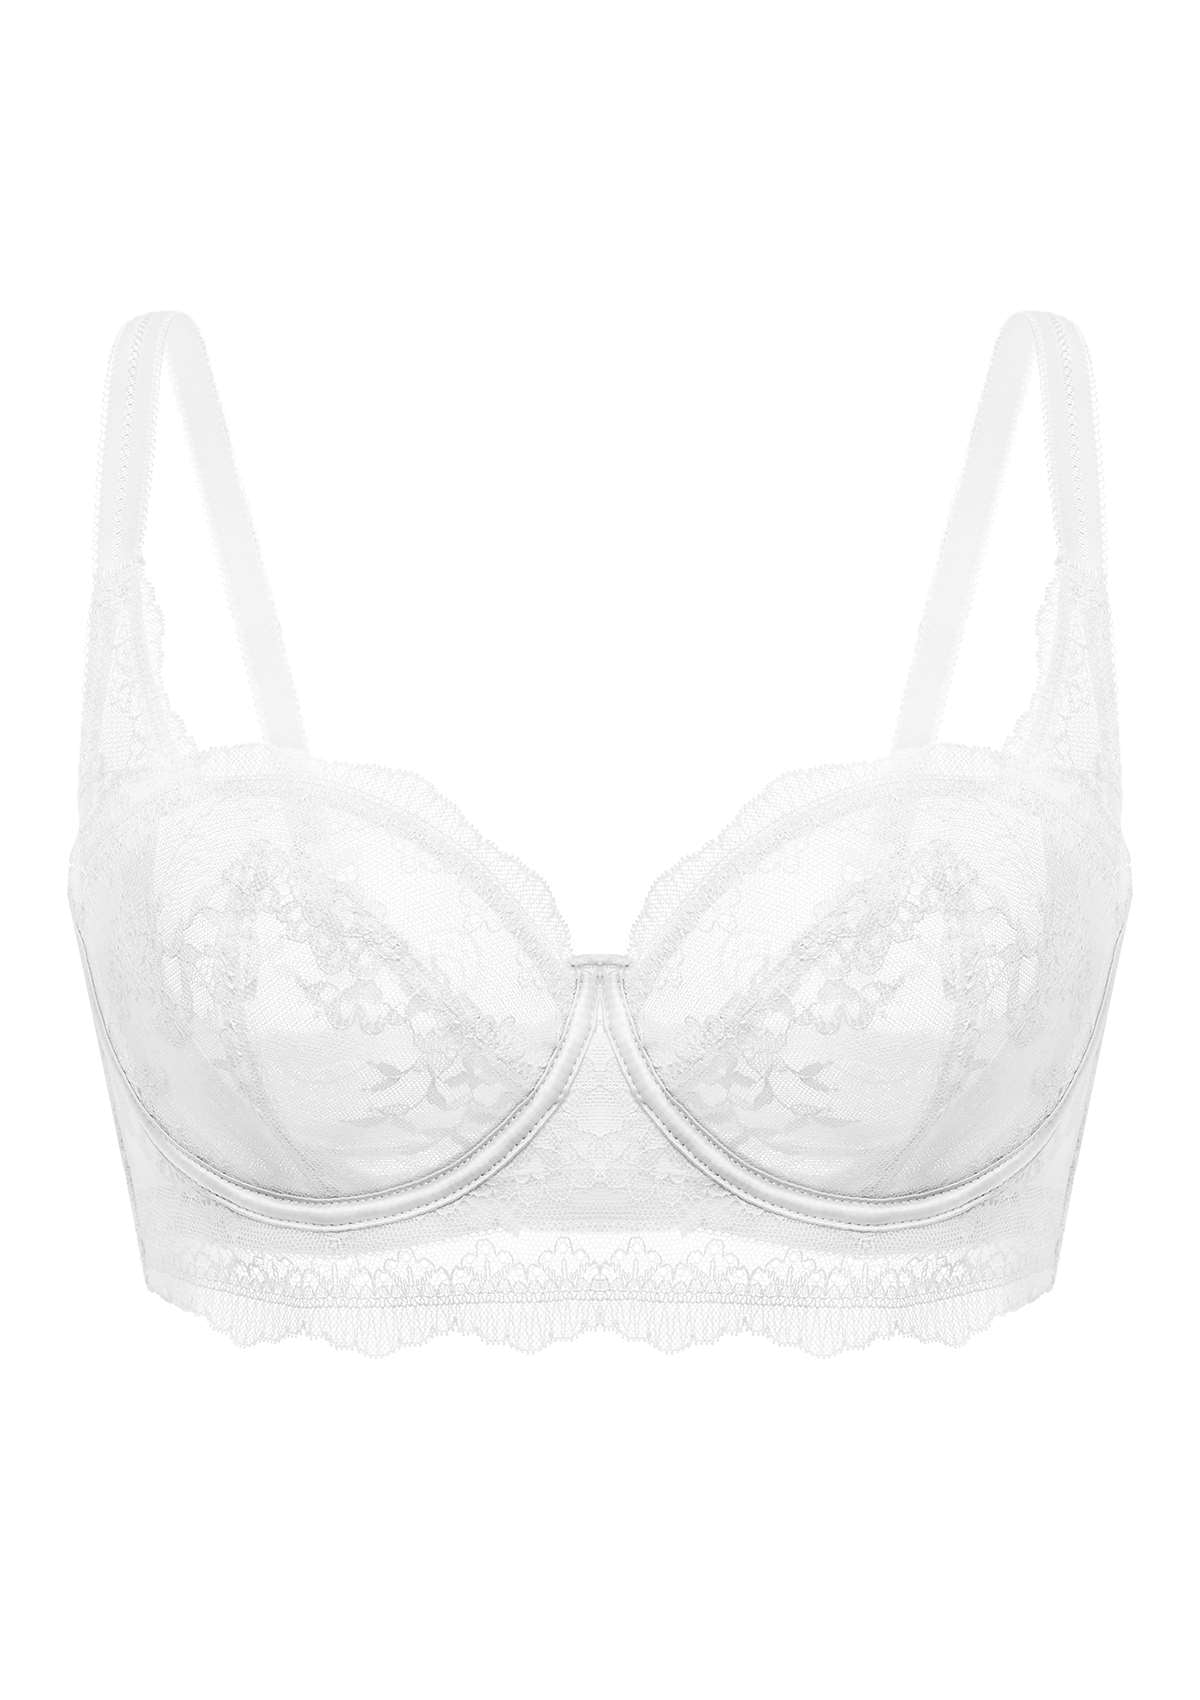 HSIA I Do Floral Lace Bridal Balconette Beautiful Bra For Special Day - White / 36 / C